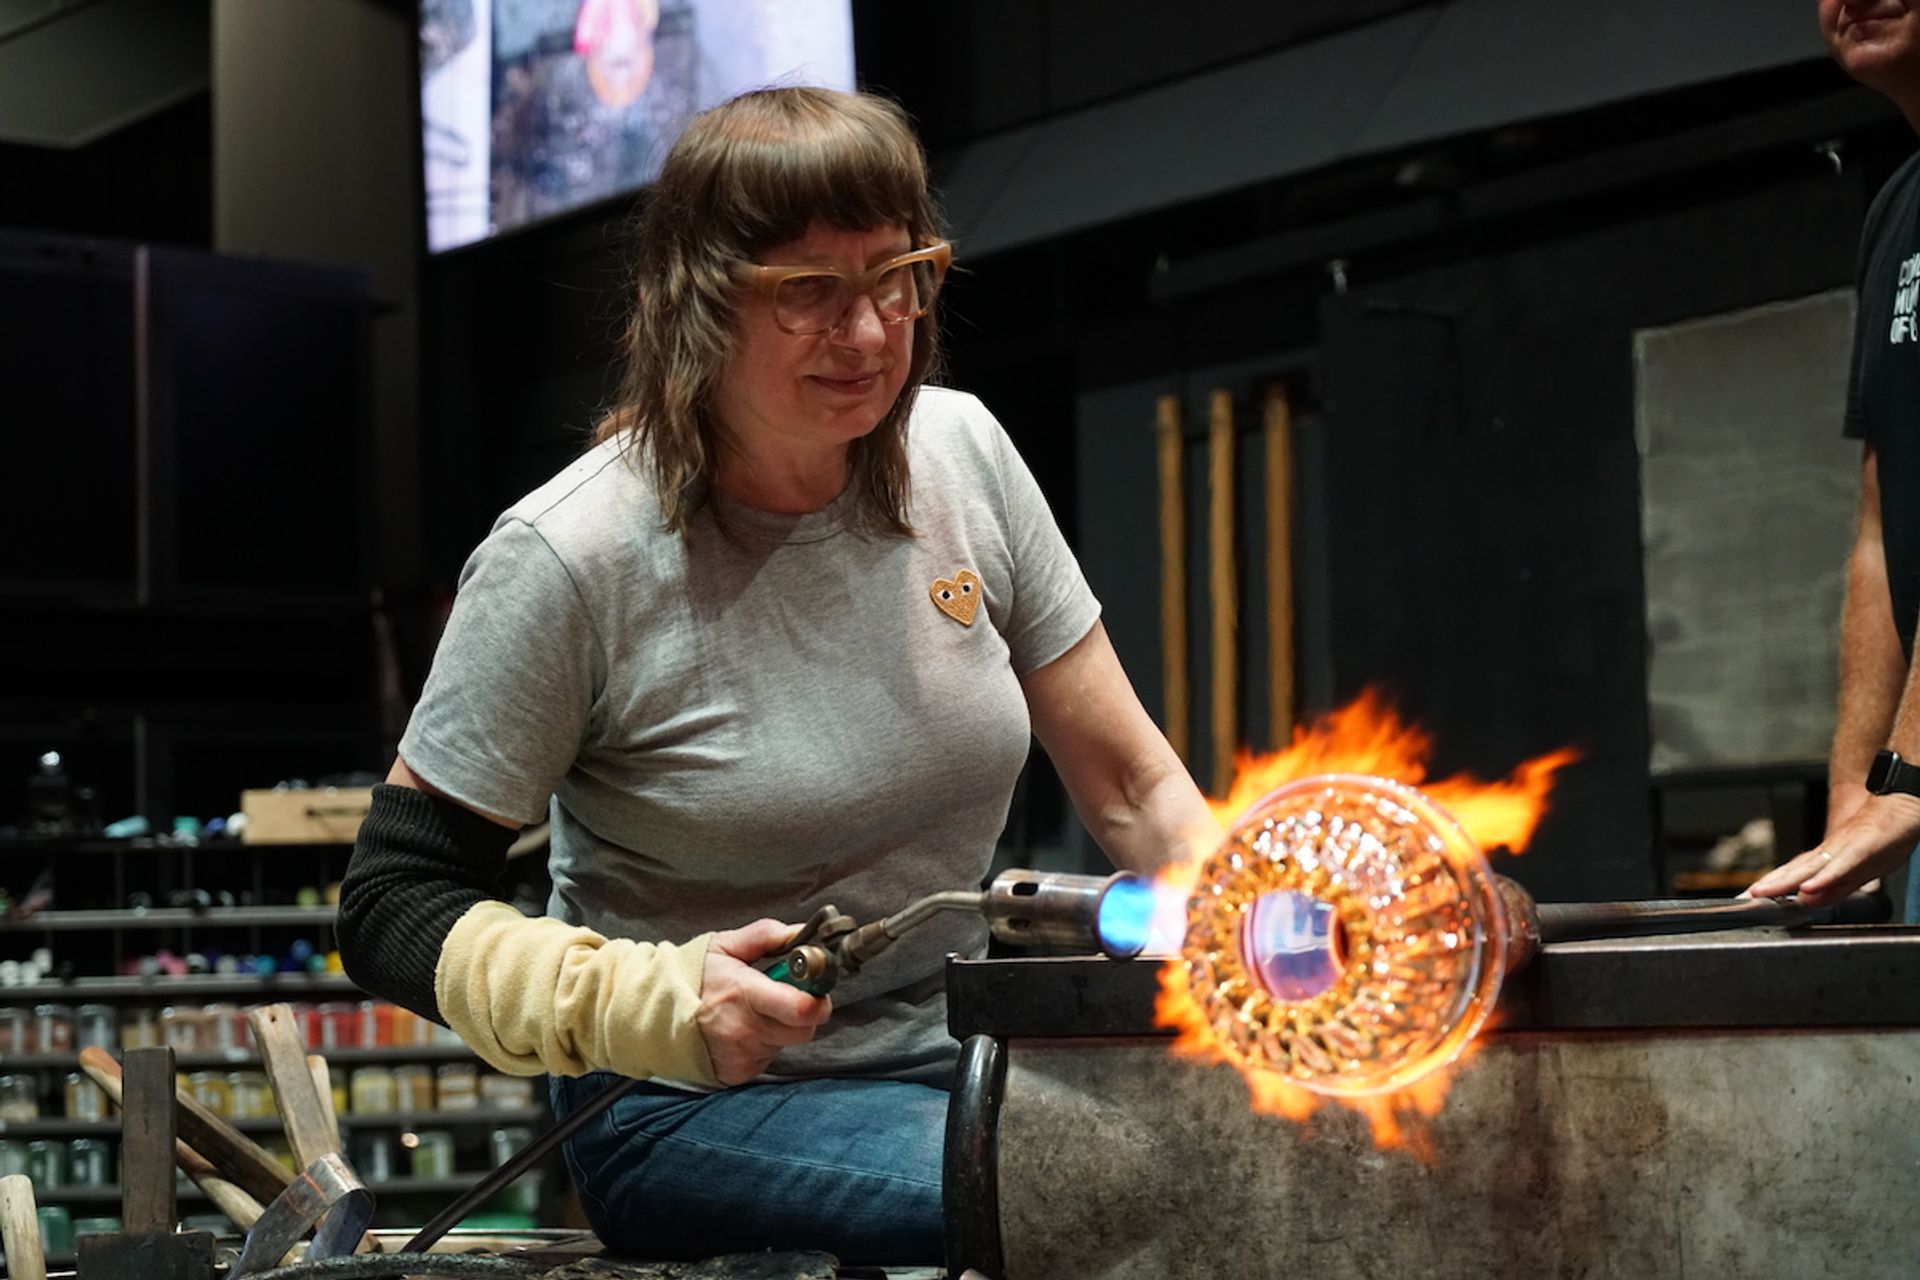 Deborah Czeresko working a glass hubcap at the Corning Museum of Glass Courtesy of The Corning Museum of Glass